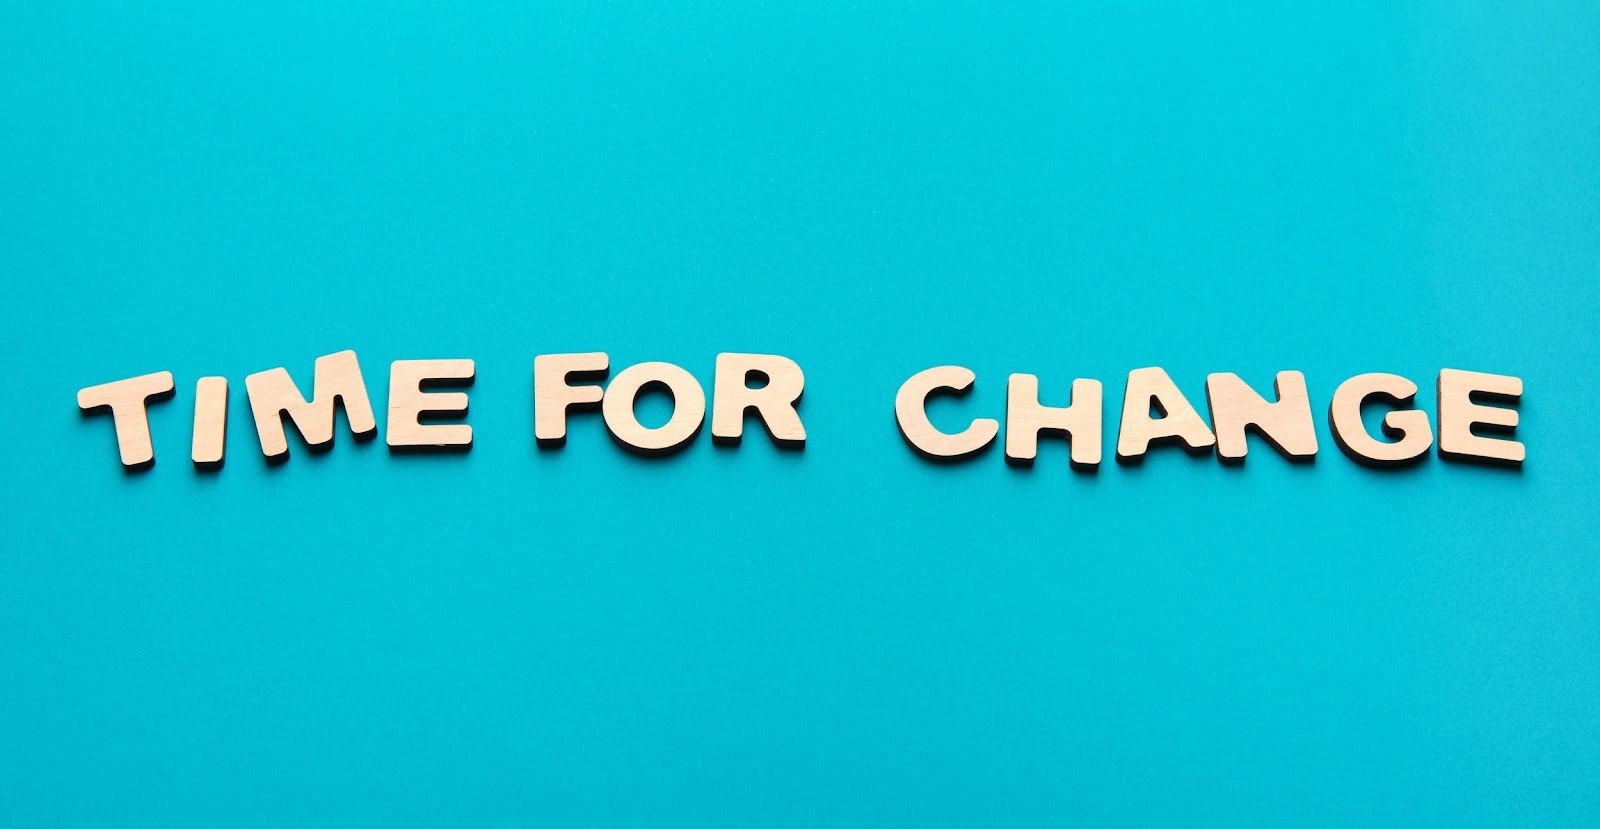 "Time for change" in block letters on a blue backdrop 